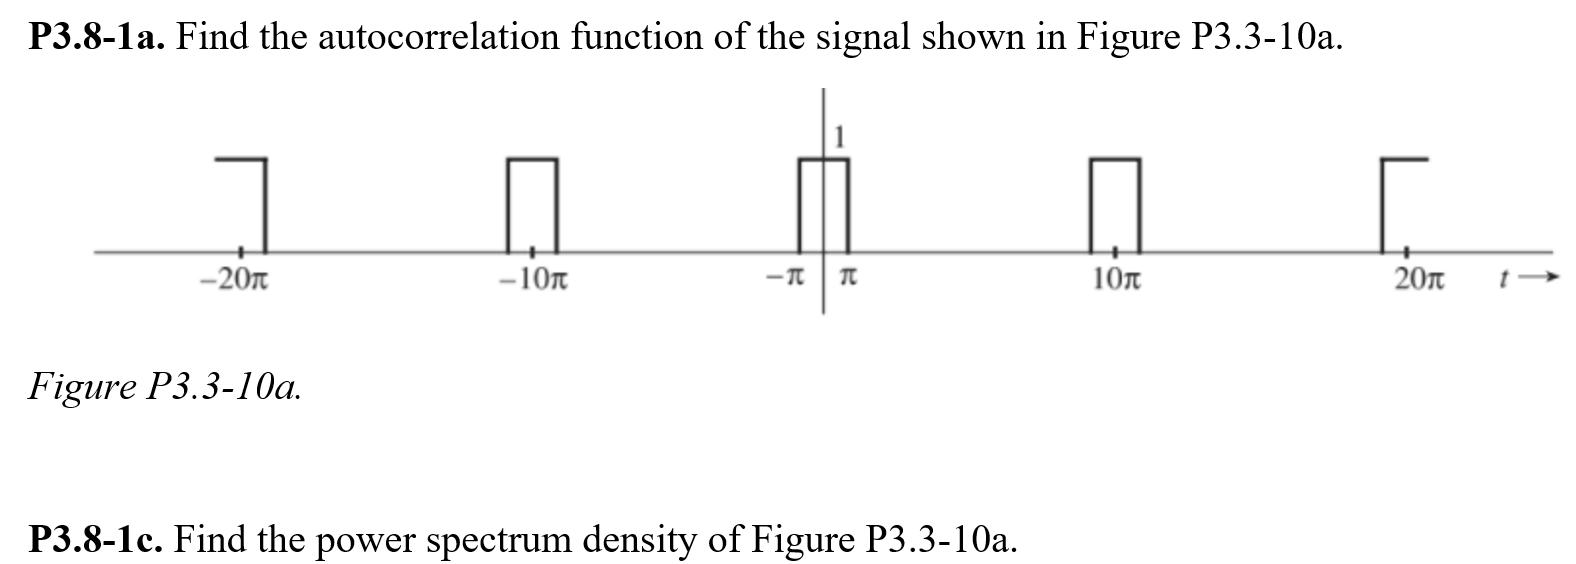 P3.8-1a. Find the autocorrelation function of the signal shown in Figure P3.3-10a. 그. .- 2010 -101 -TT 101 2011 Figure P3.3